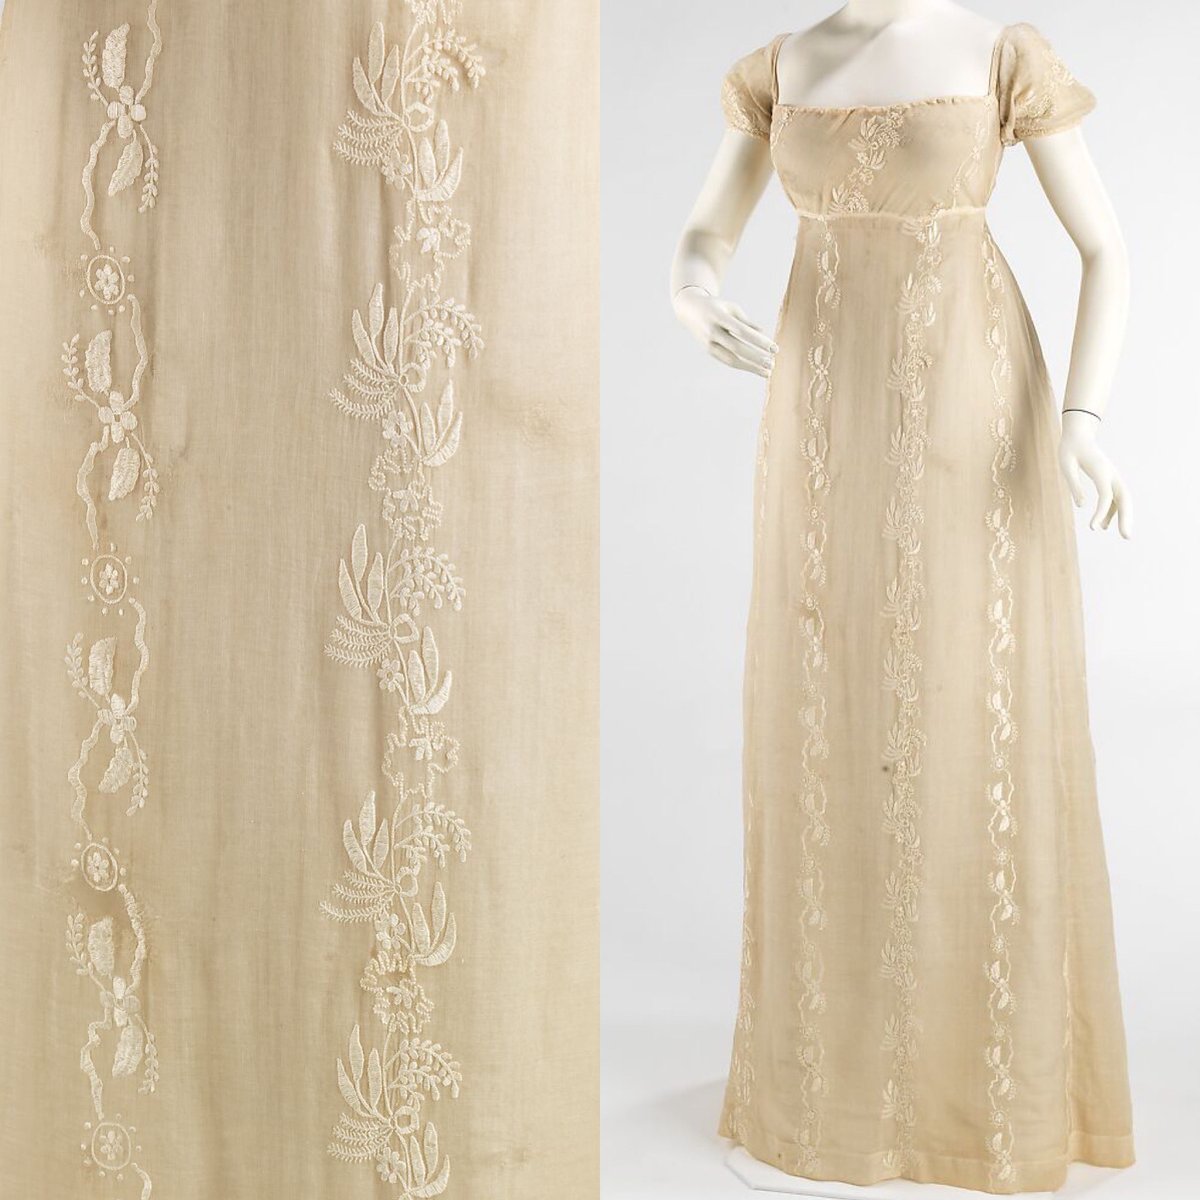 This c1810 evening dress was made using the finest #handembroidered Indian muslin, the fashionable fabric of choice during this period. The #whitework would have been highlighted by a candle flicker against the sheer weave of the cotton @metmuseum #fashionhistory